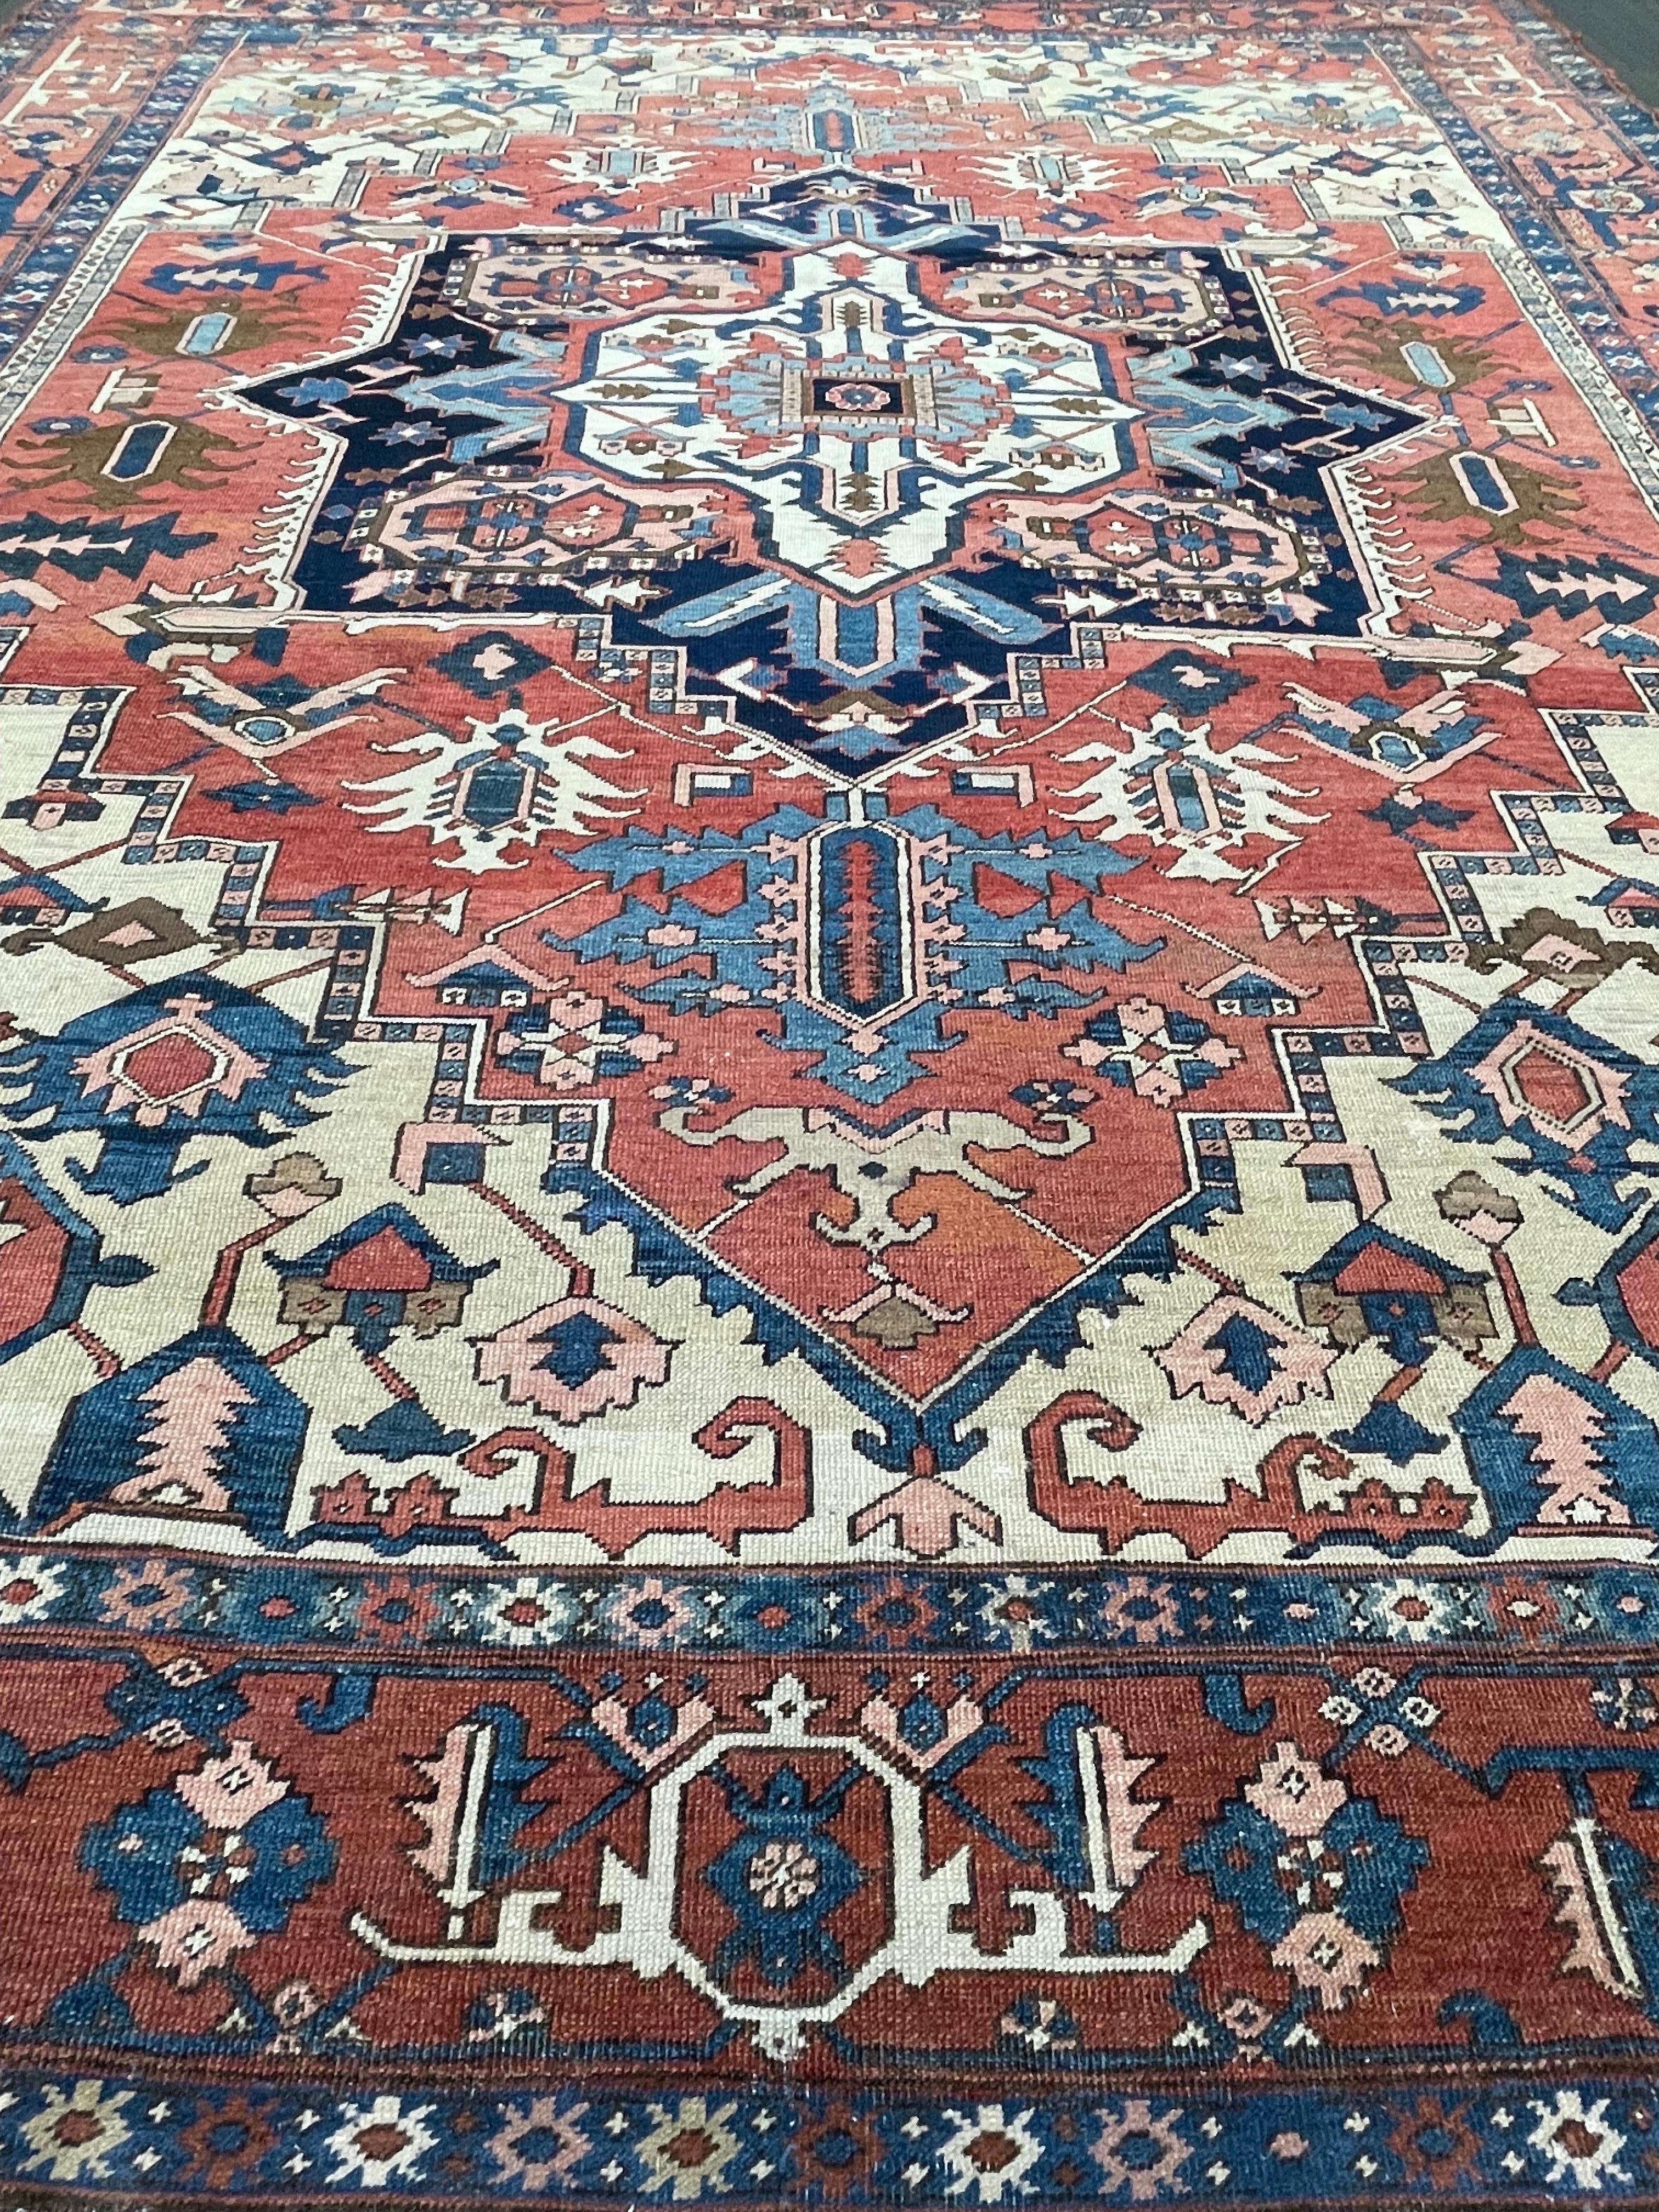 This carpet is hand woven in the northwest region of Persia in Heriz/Serapi town. Serapi carpets have a cotton warp and double-cotton weft. The wool used to make this rug is hand spun and of high quality, the dyes are all organic extracted from